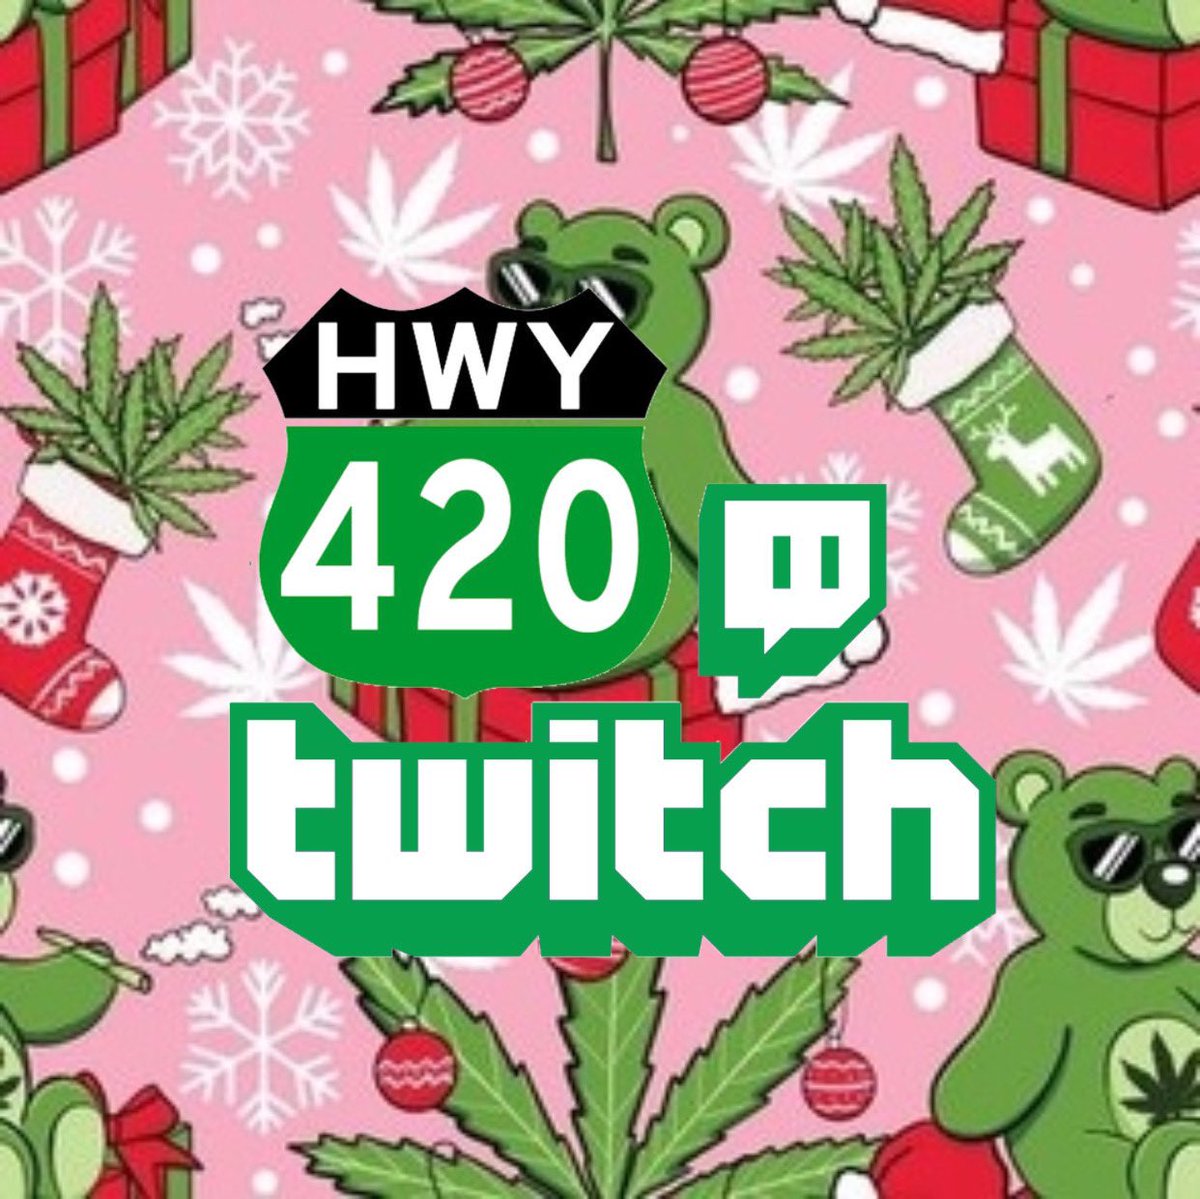 🌎Come grow with us and support each other!🌍

1. Retweet+Like
2. Post your #Twitch / #youtube
3. Follow Everyone
4. Support each other

#SupportSmallStreamers #420Twitch
#Twitchstream #TwitchTv 
#twitchgaming #YouTube 
#SmallStreamerCommunity 
@SupStreamers #TwitchAffilate #ps5